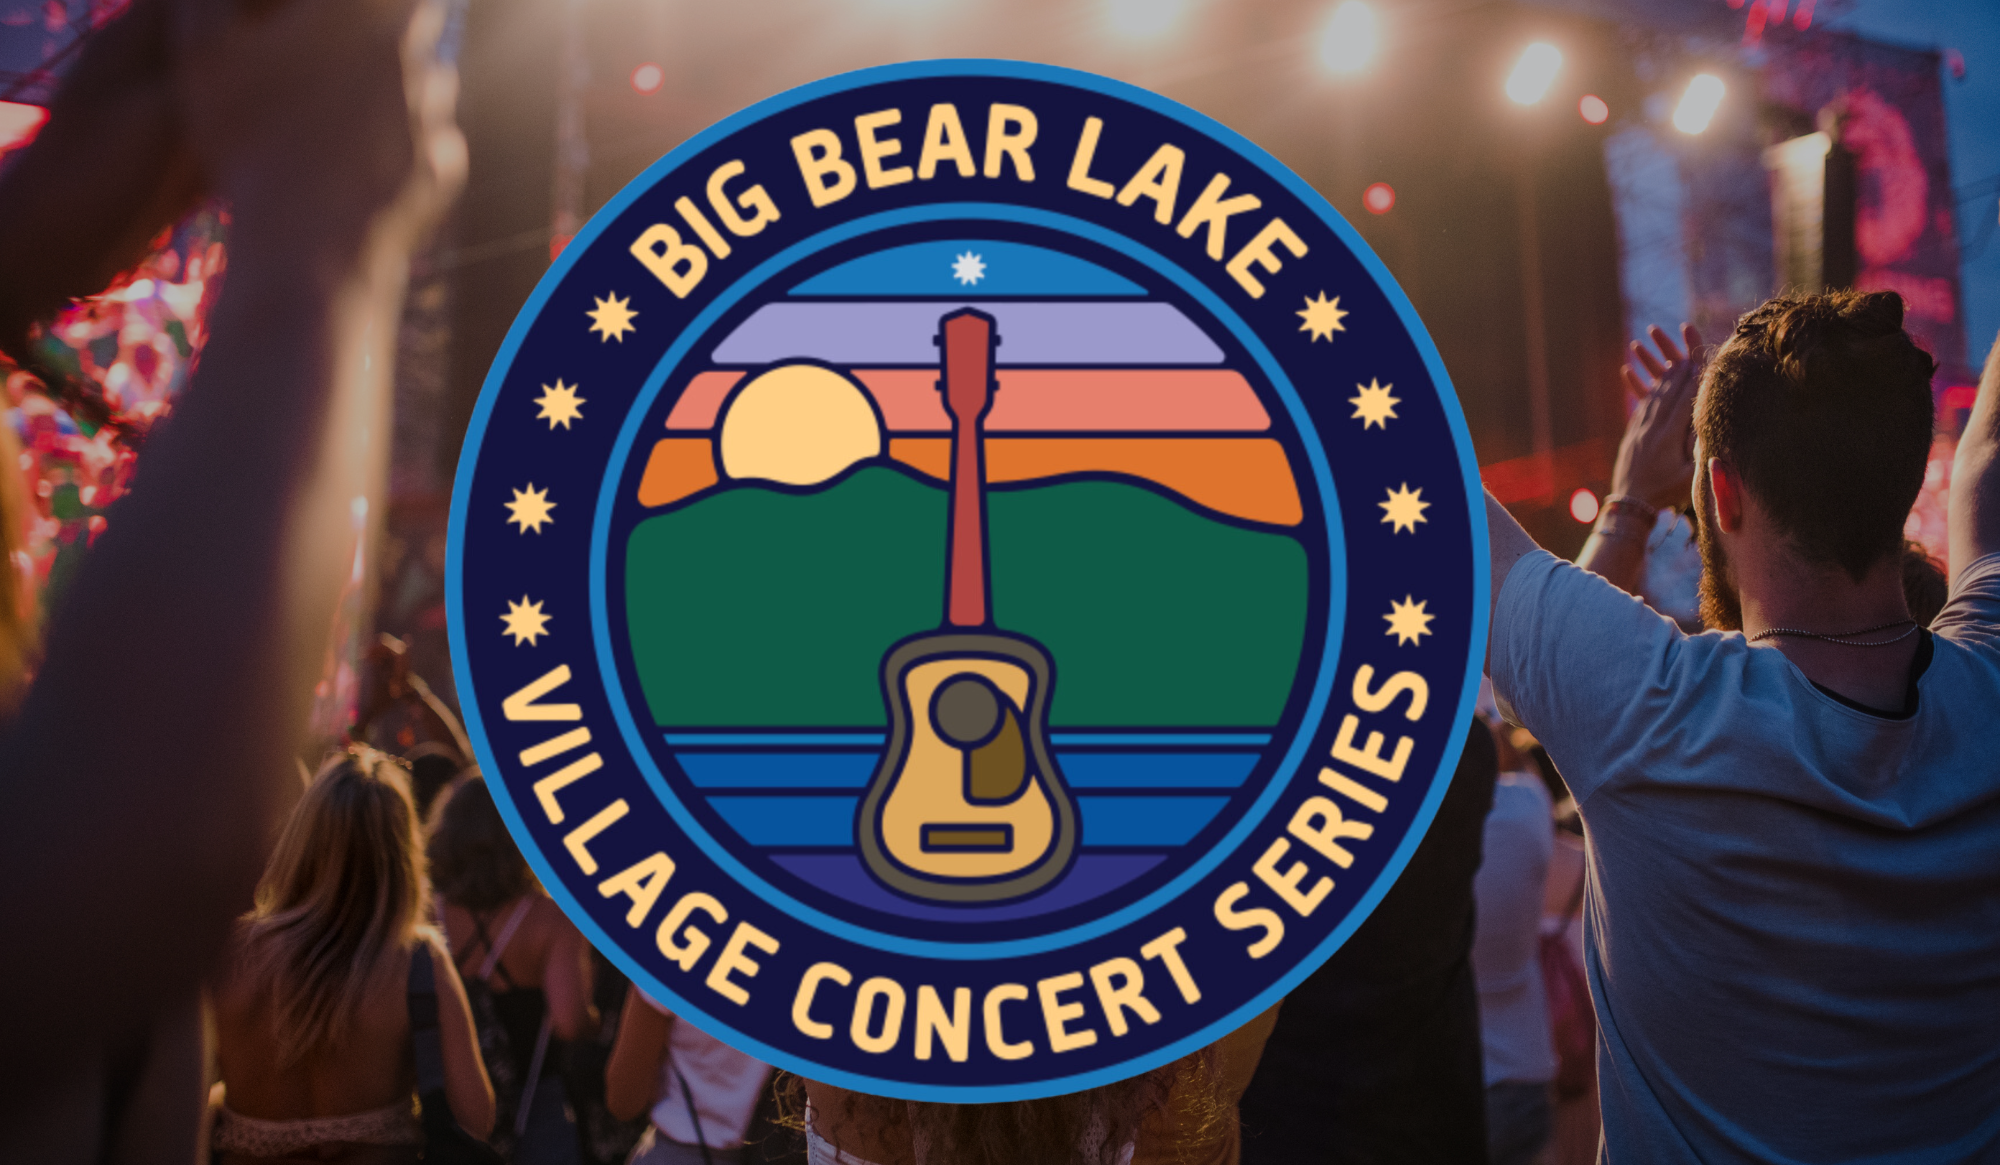 A circular logo reads "Big Bear Village Concert Series" and frames a scene of a sunset, mountains, and guitar. In the backdrop, attendees stand with raised arms, savoring the outdoor concert.